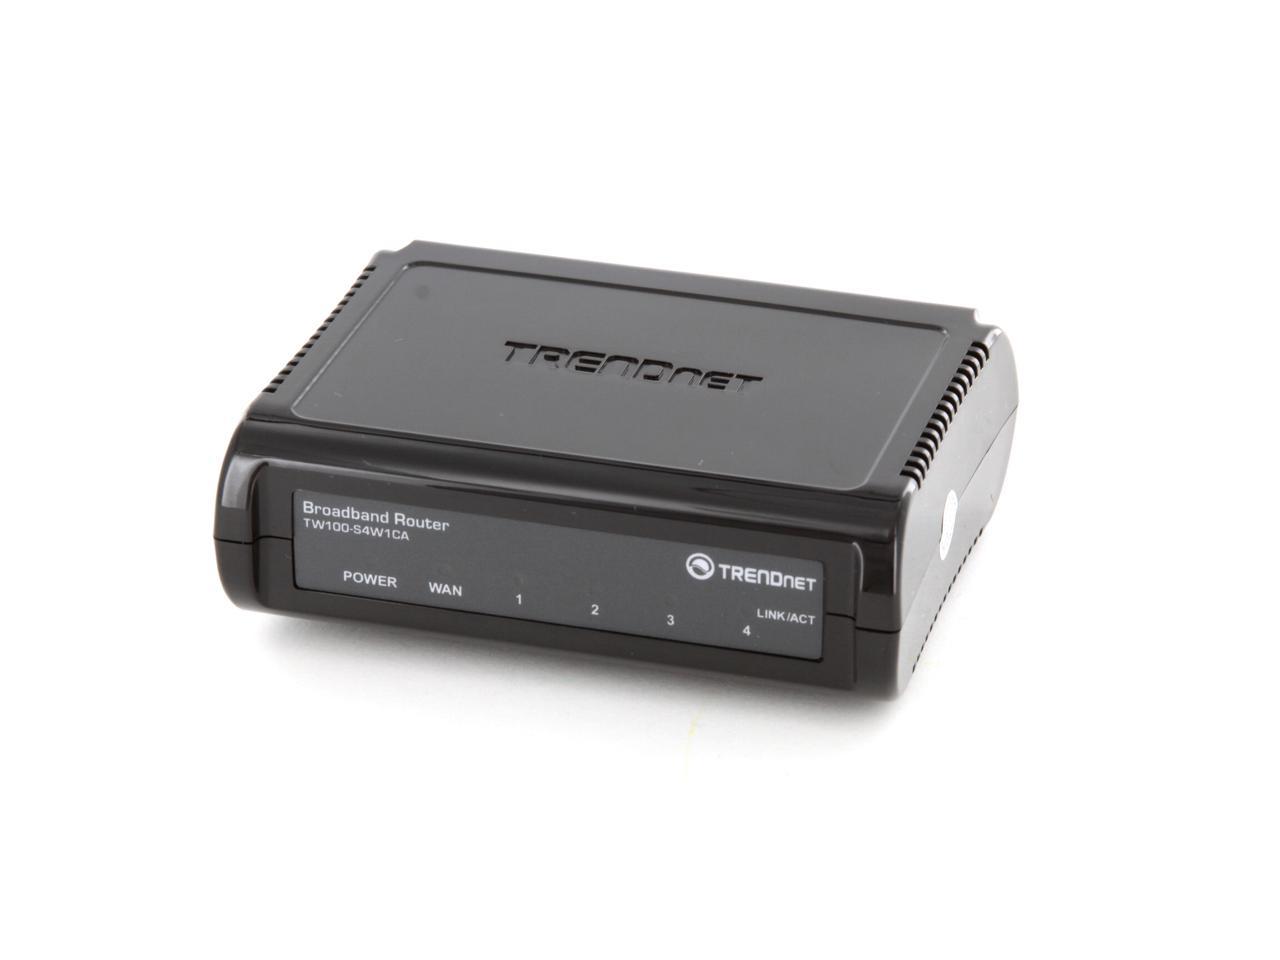 TRENDnet TW100-S4W1CA 10/100Mbps DSL/Cable Broadband Router - Newegg.com